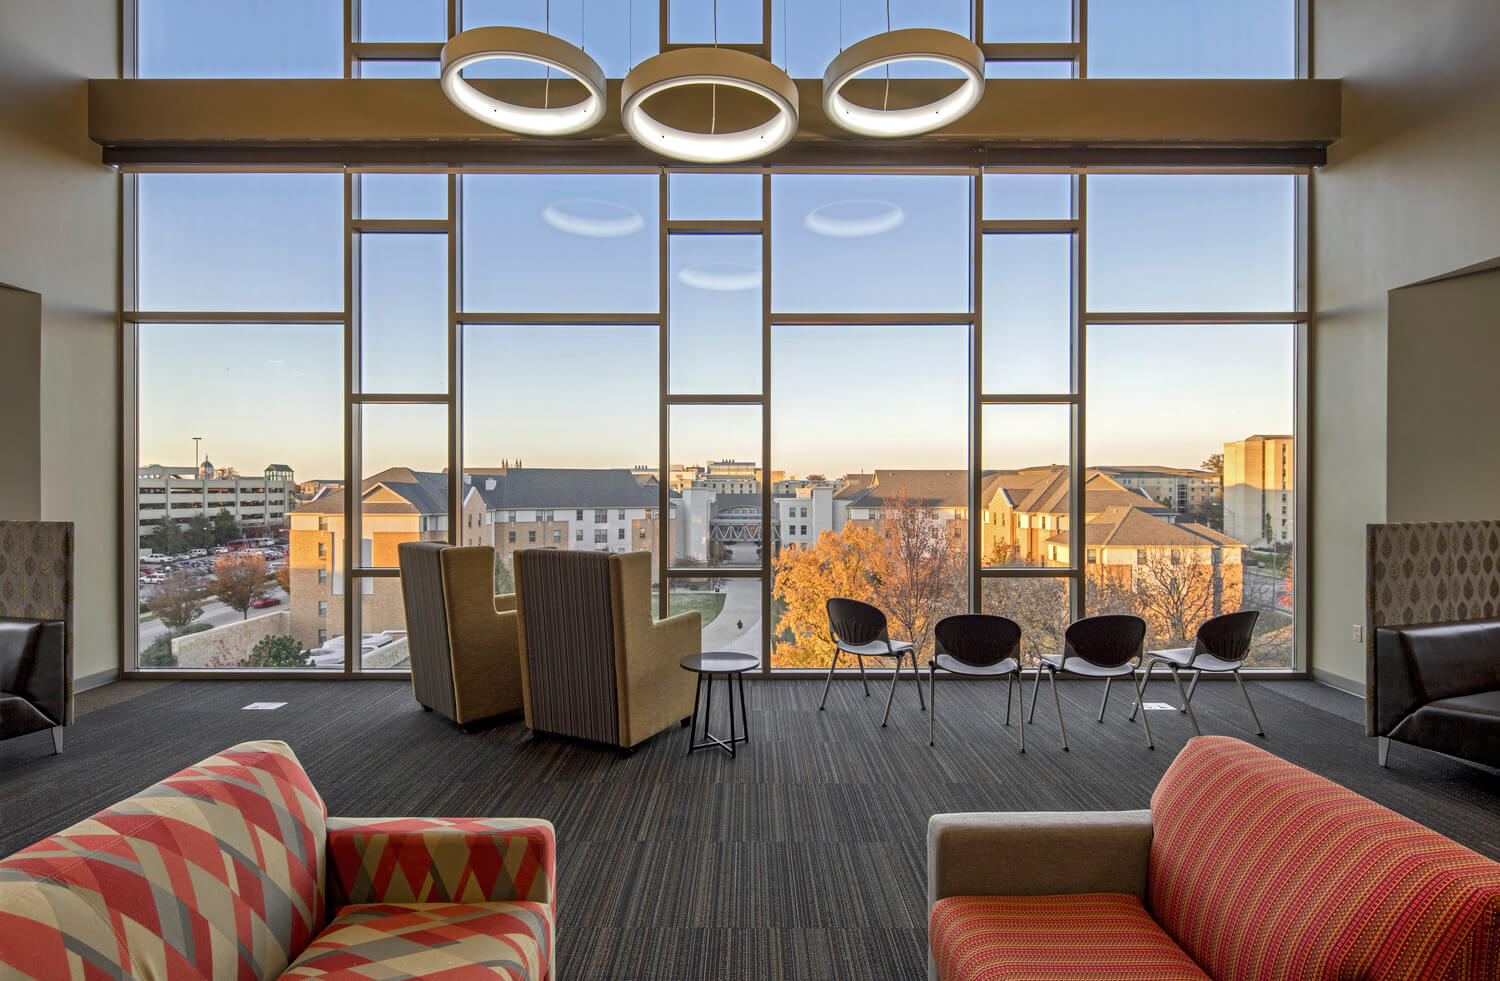 Lounge in Gateway Hall residence hall at Missouri State University